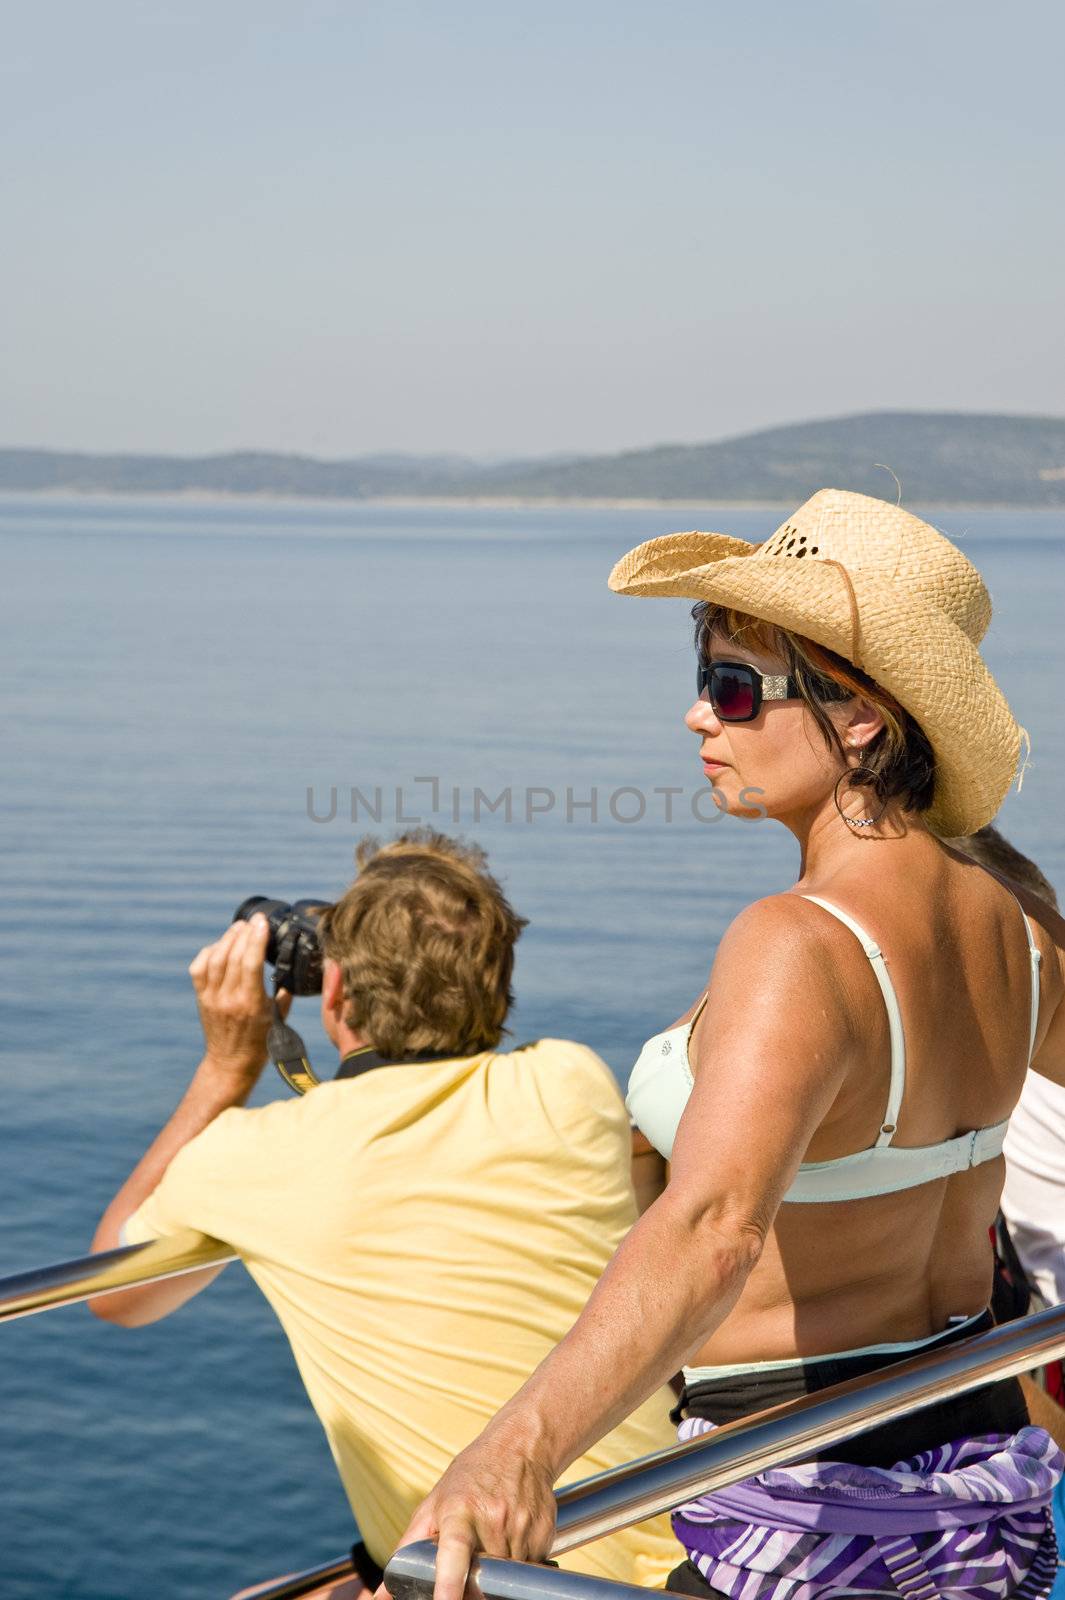 Tourists on a deck of the excursion ship, taken in Croatia